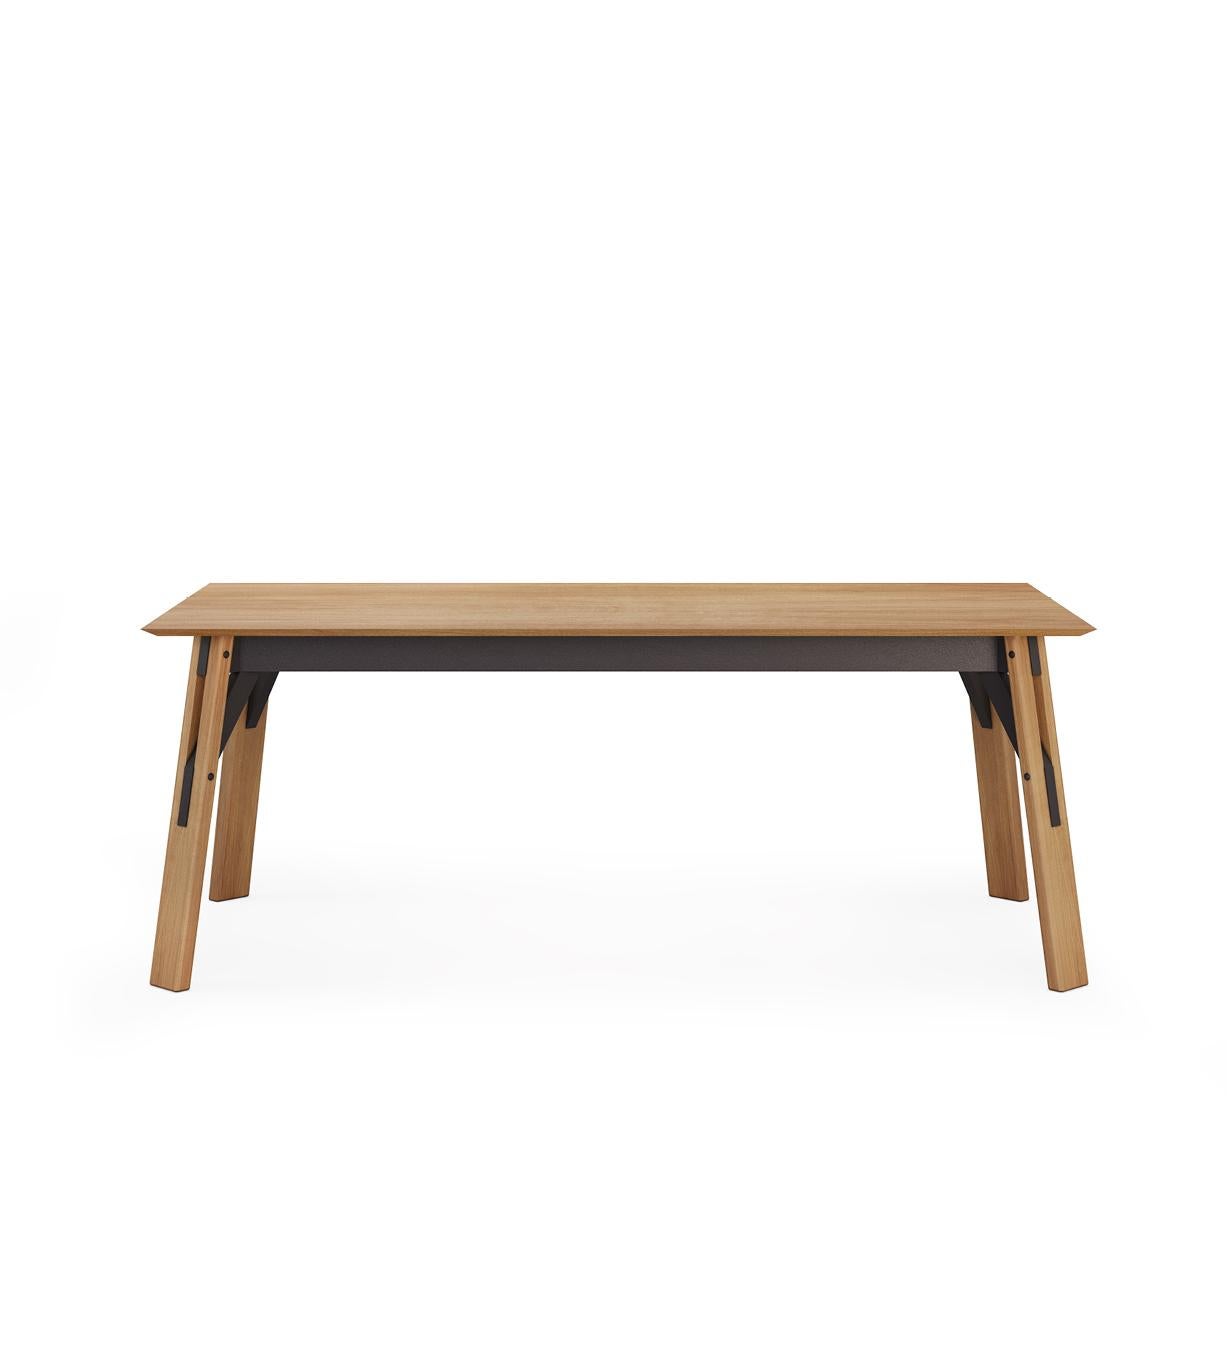 A classic design with modern details. The shape of the table expresses a complicated simplicity with geometric forms. With an extensible top, the table offers plenty of space for large gatherings. Sits comfortably 6 (+4) people.